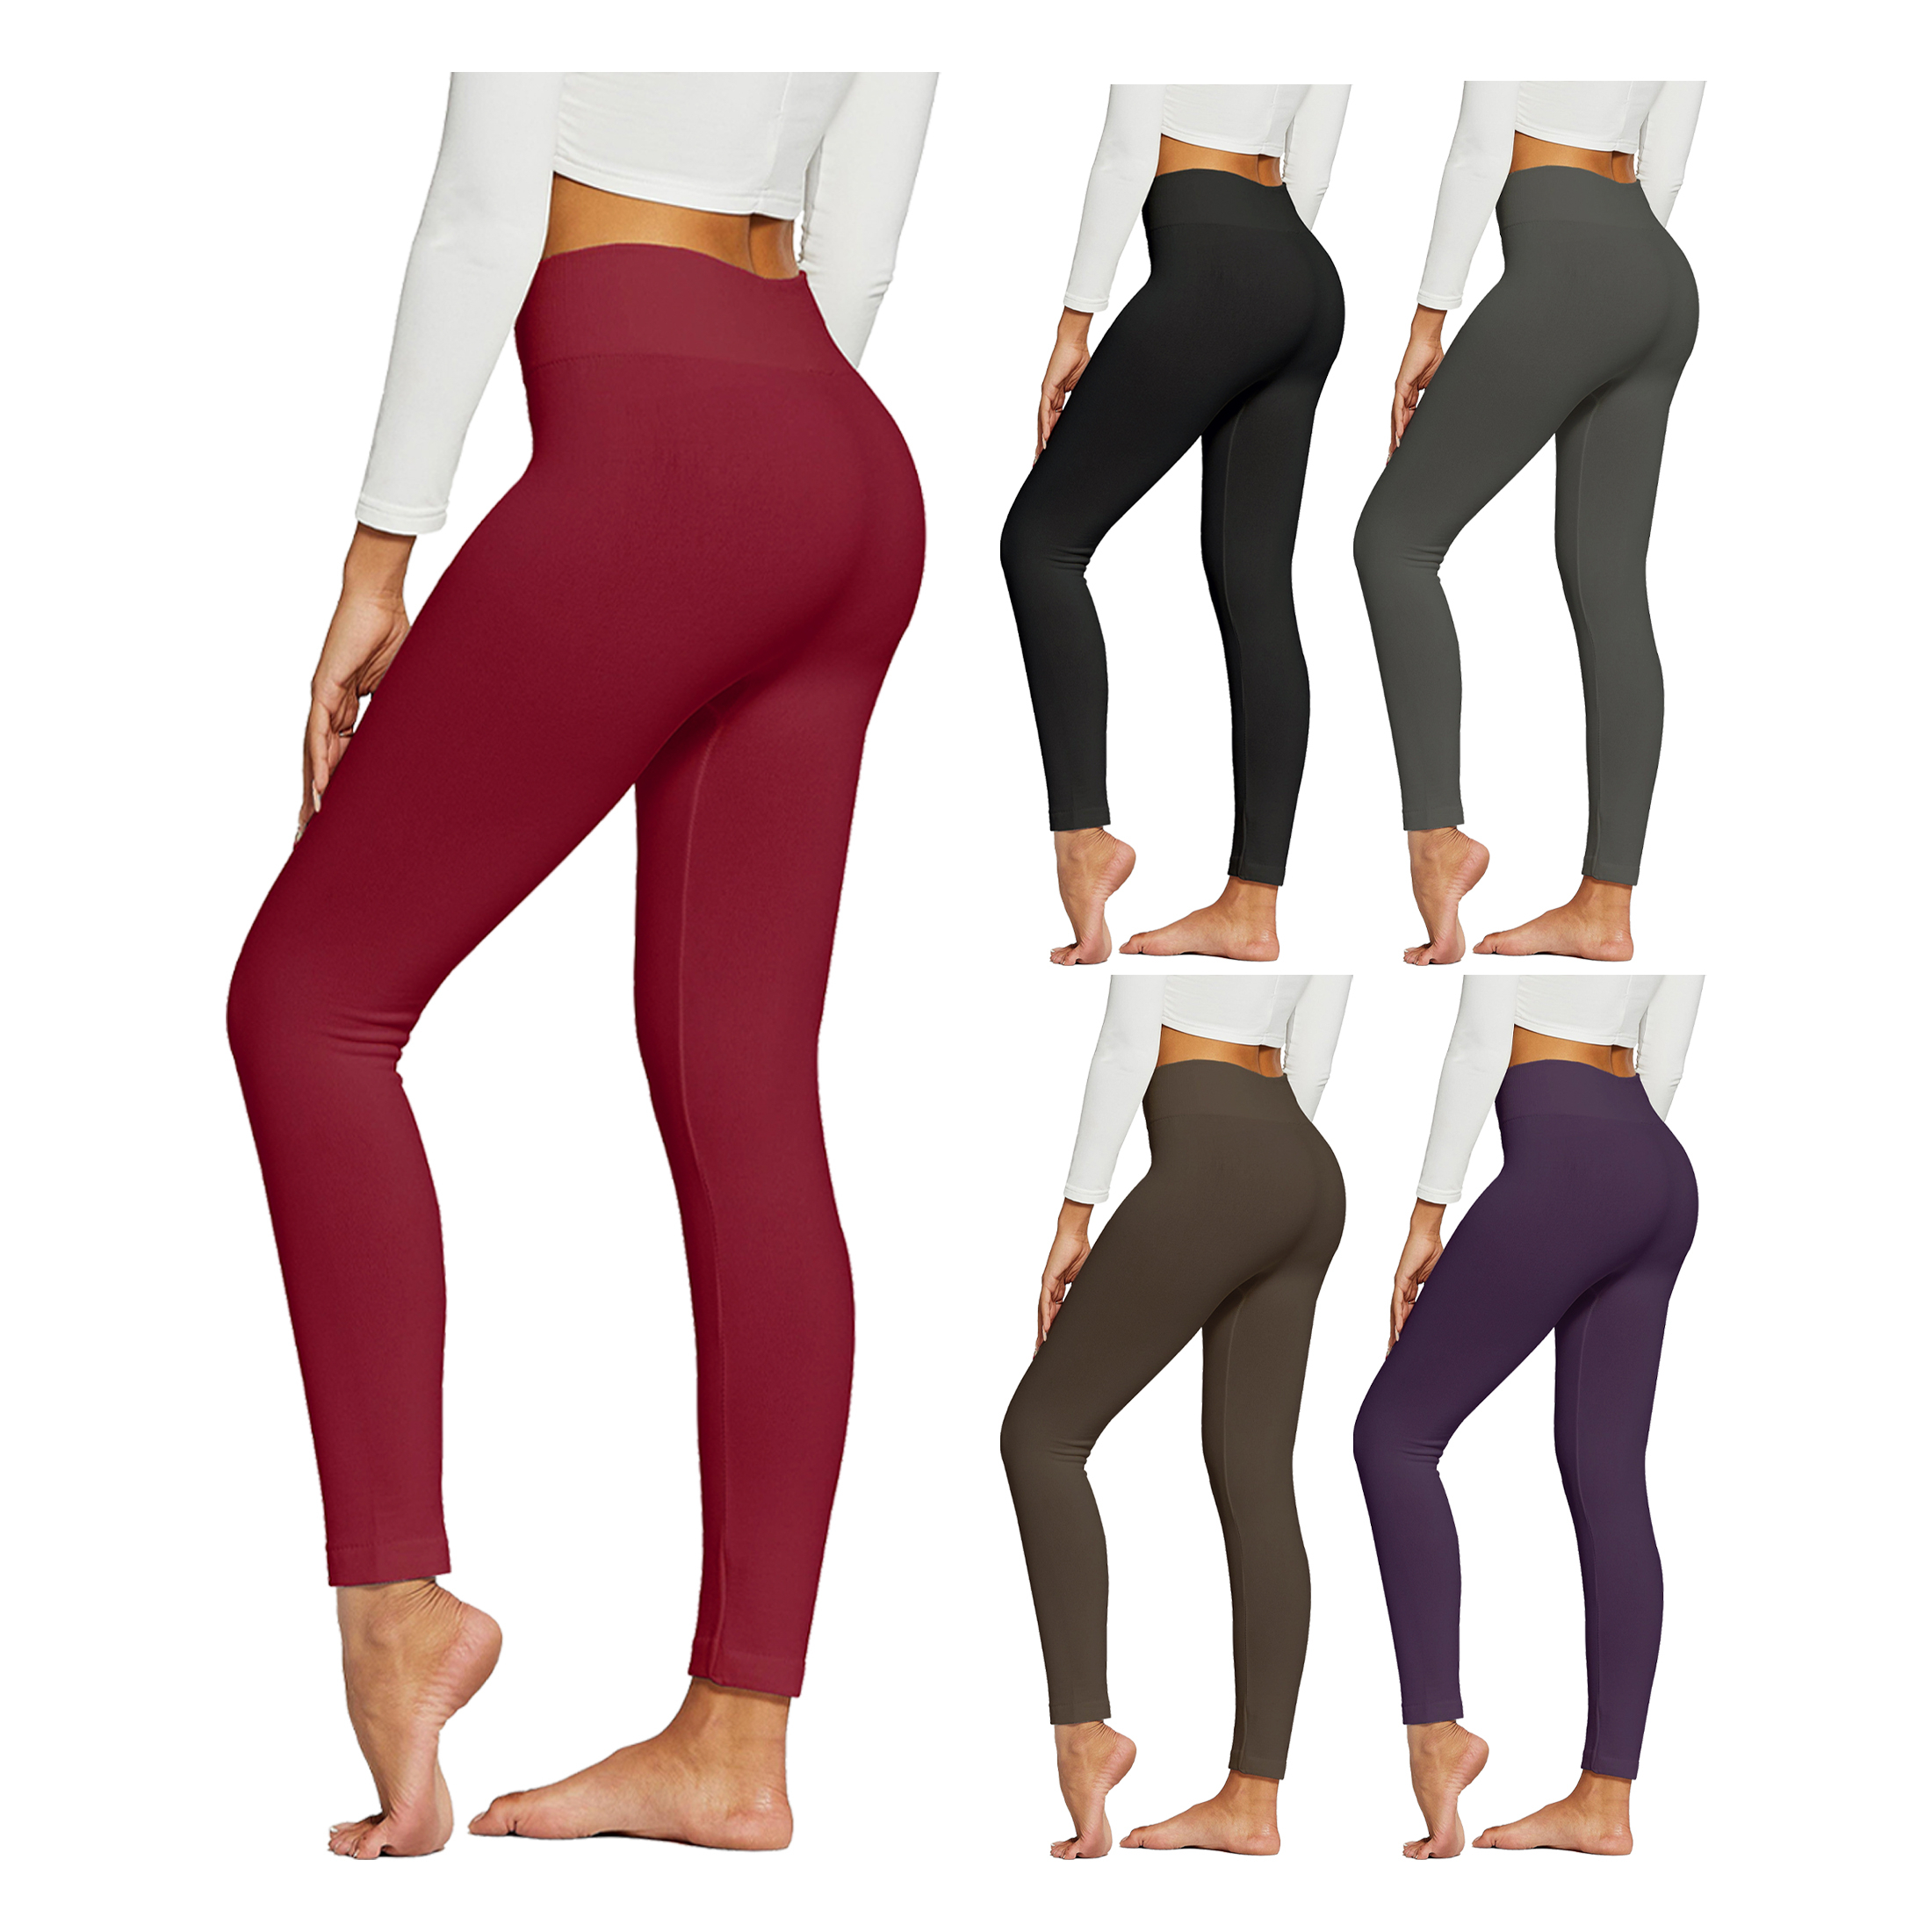 4-Pack:Women's Premium Quality High-Waist Fleece-Lined Leggings (Plus Size Available) - Assorted, 3X/4X